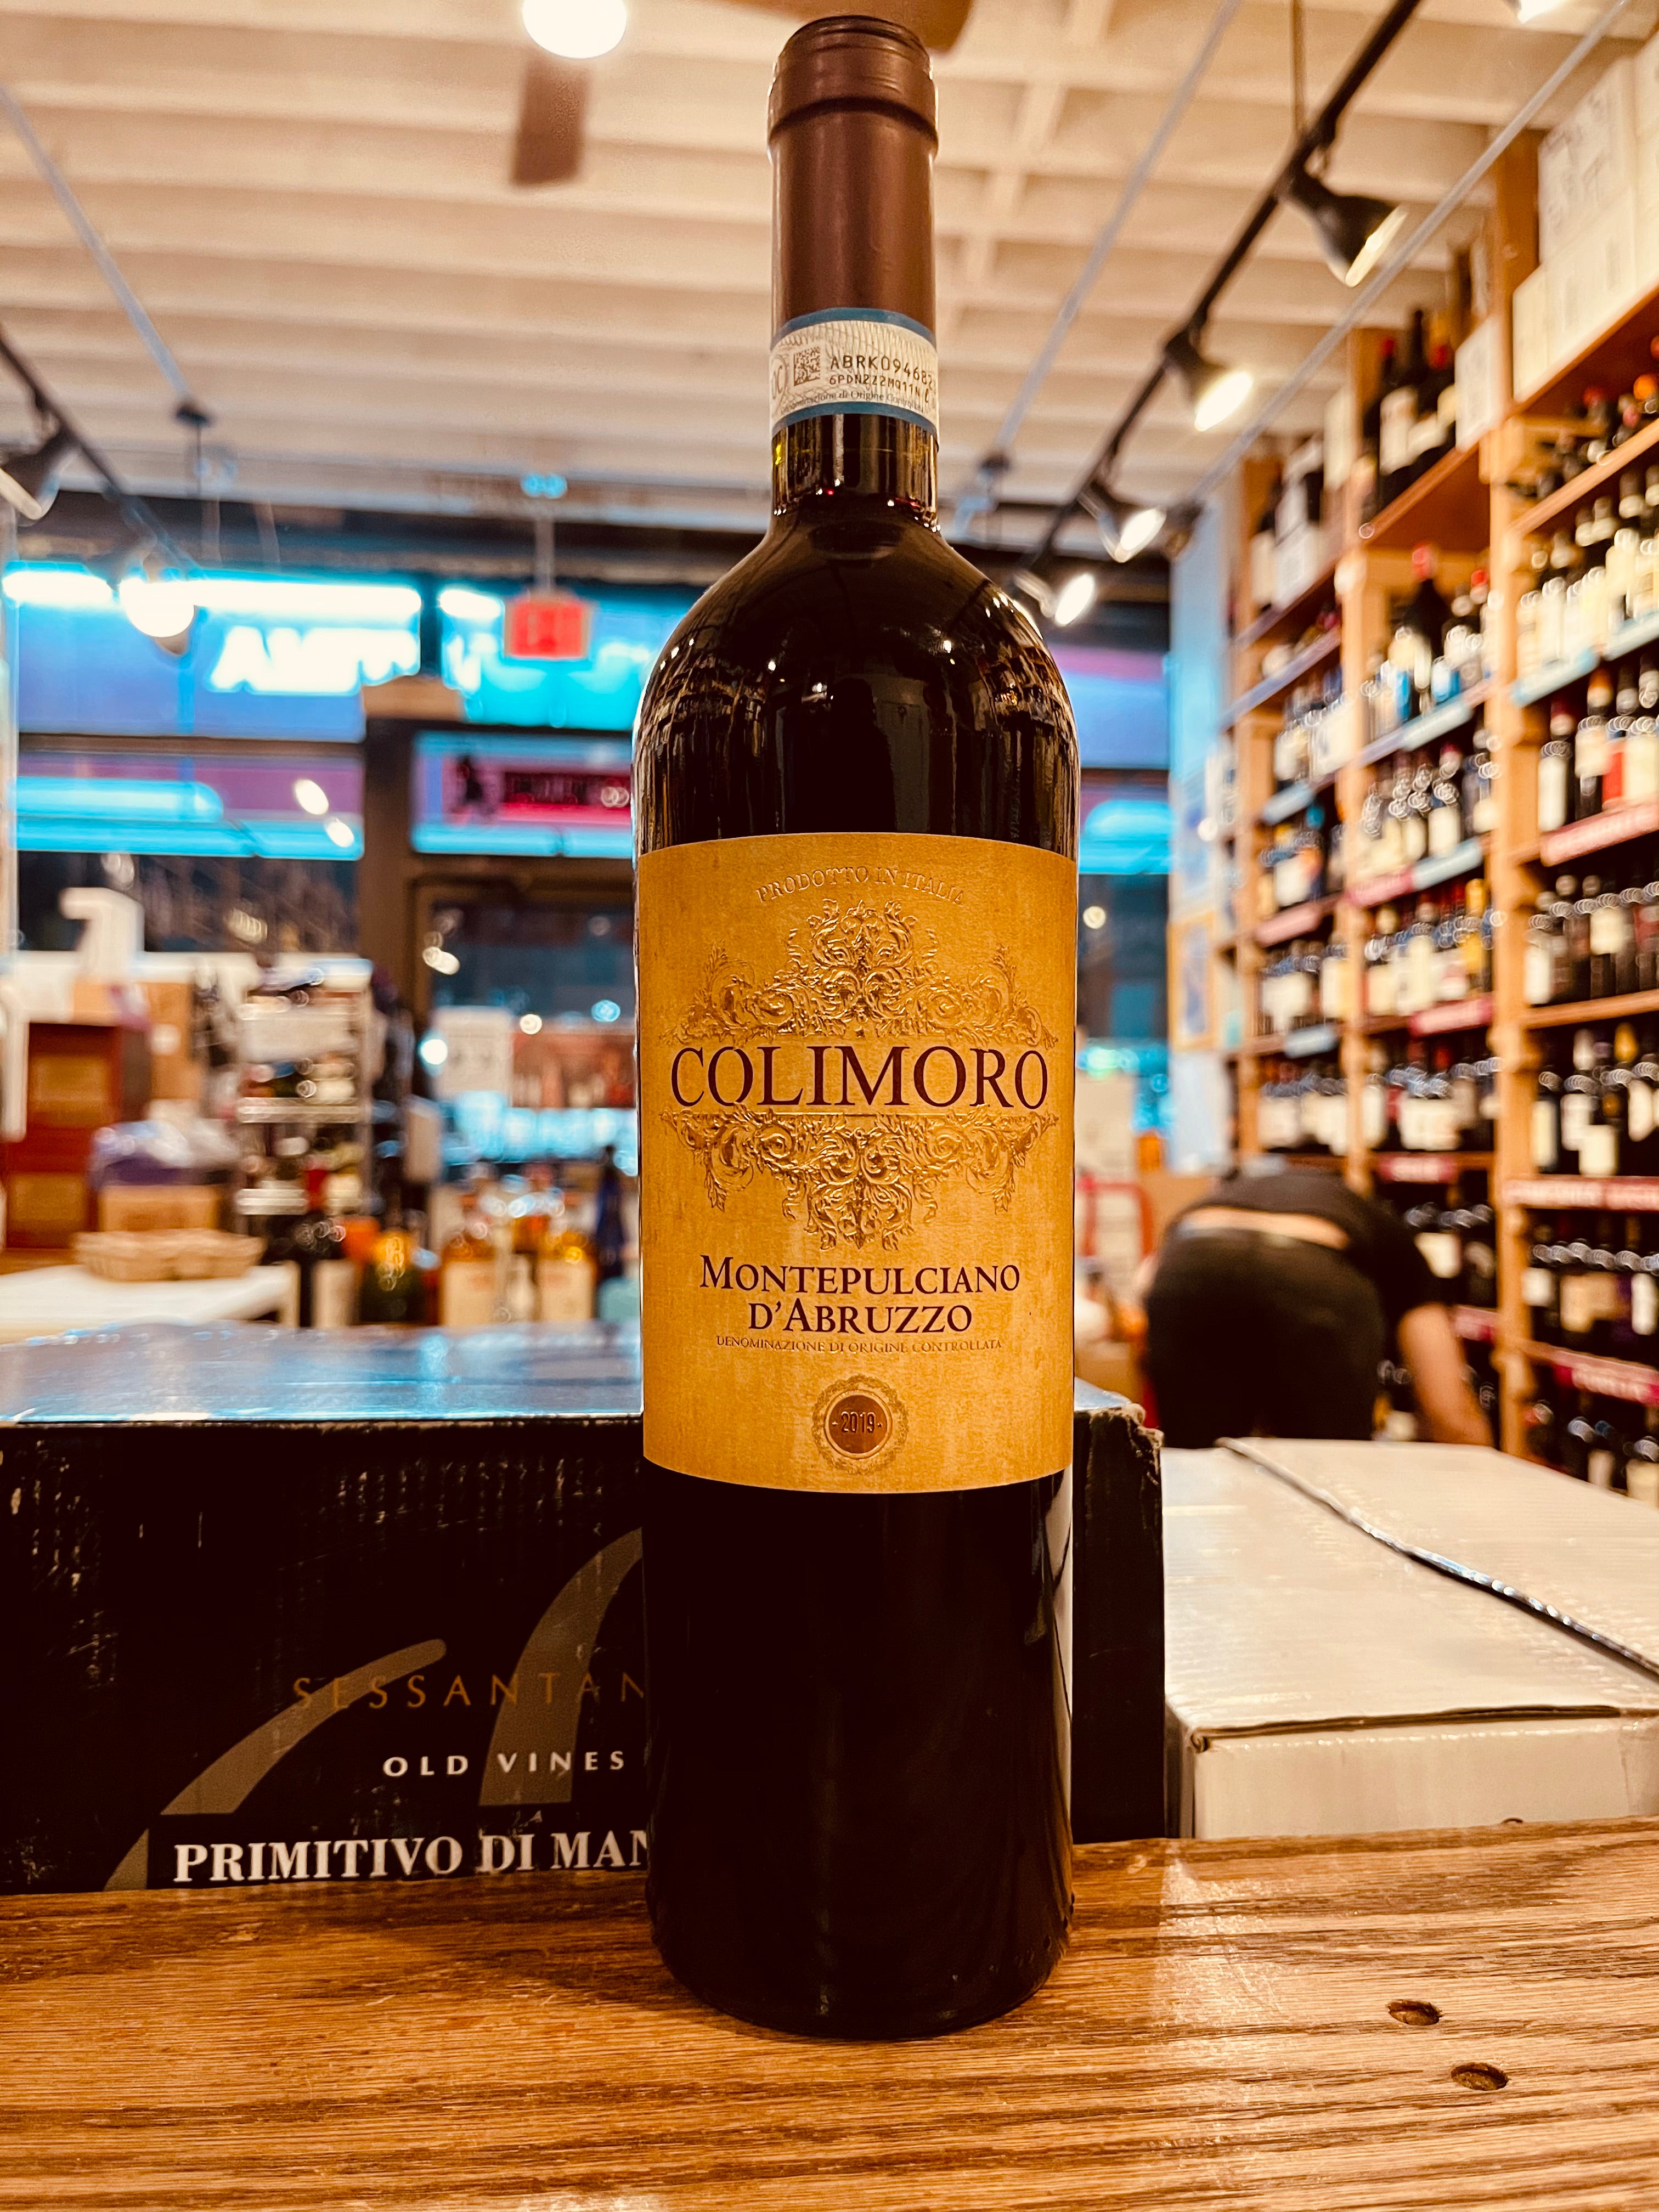 Colimoro Montepulciano d'Abruzzo 750mL dark wine bottle with a beige colored label and brown top